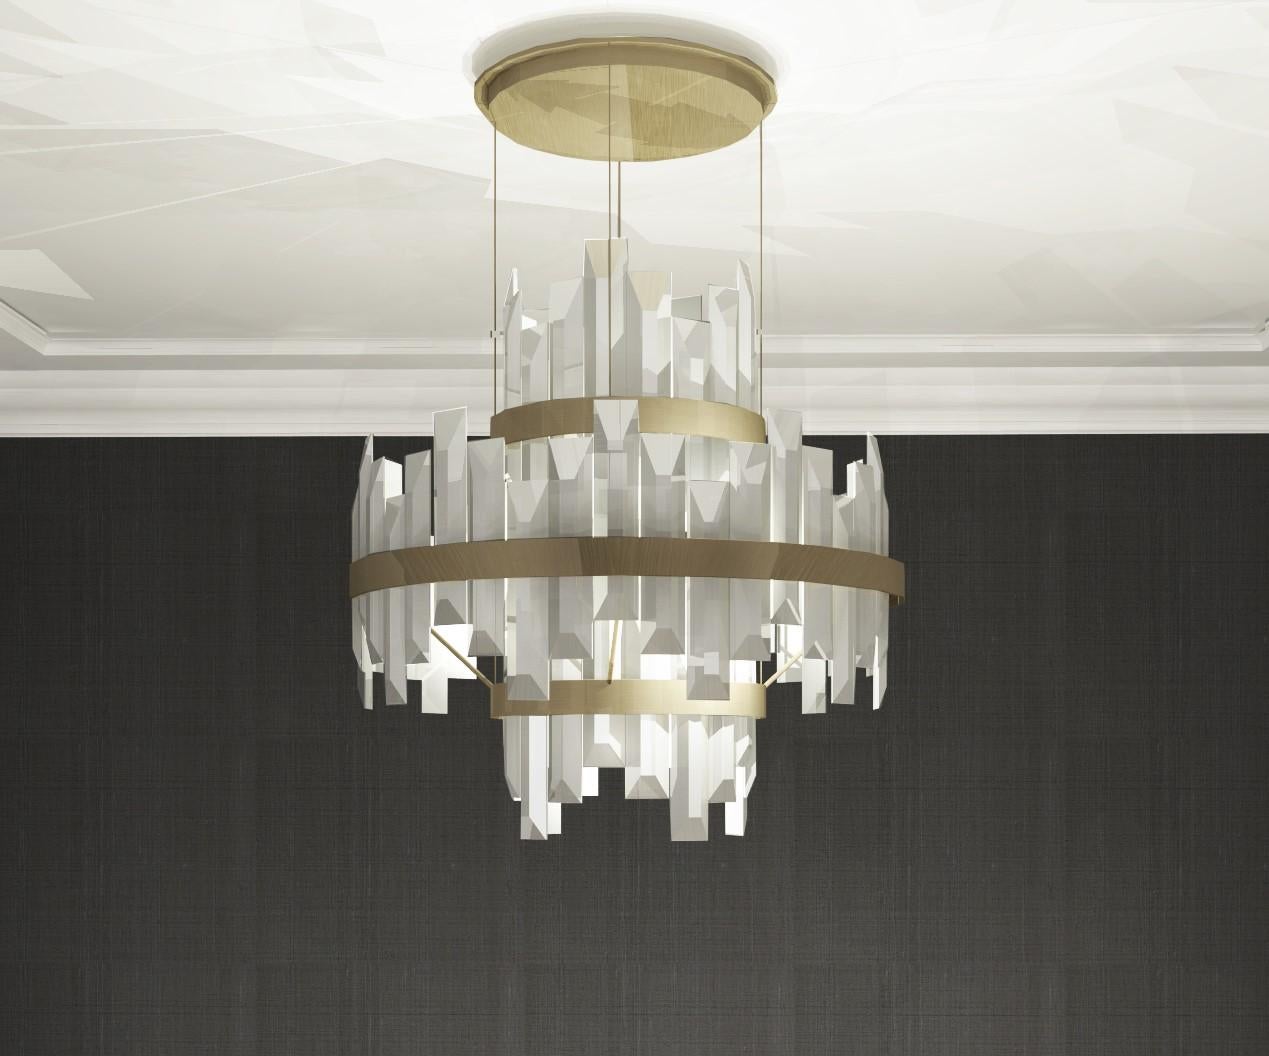 This chandelier uses a mix of bold materials, brushed brass band and over-sized crystal elements, to give impact whilst remaining clean and classic. The designs cool, clean, beveled-edge crystals give a beautiful reflection and transparency, whilst